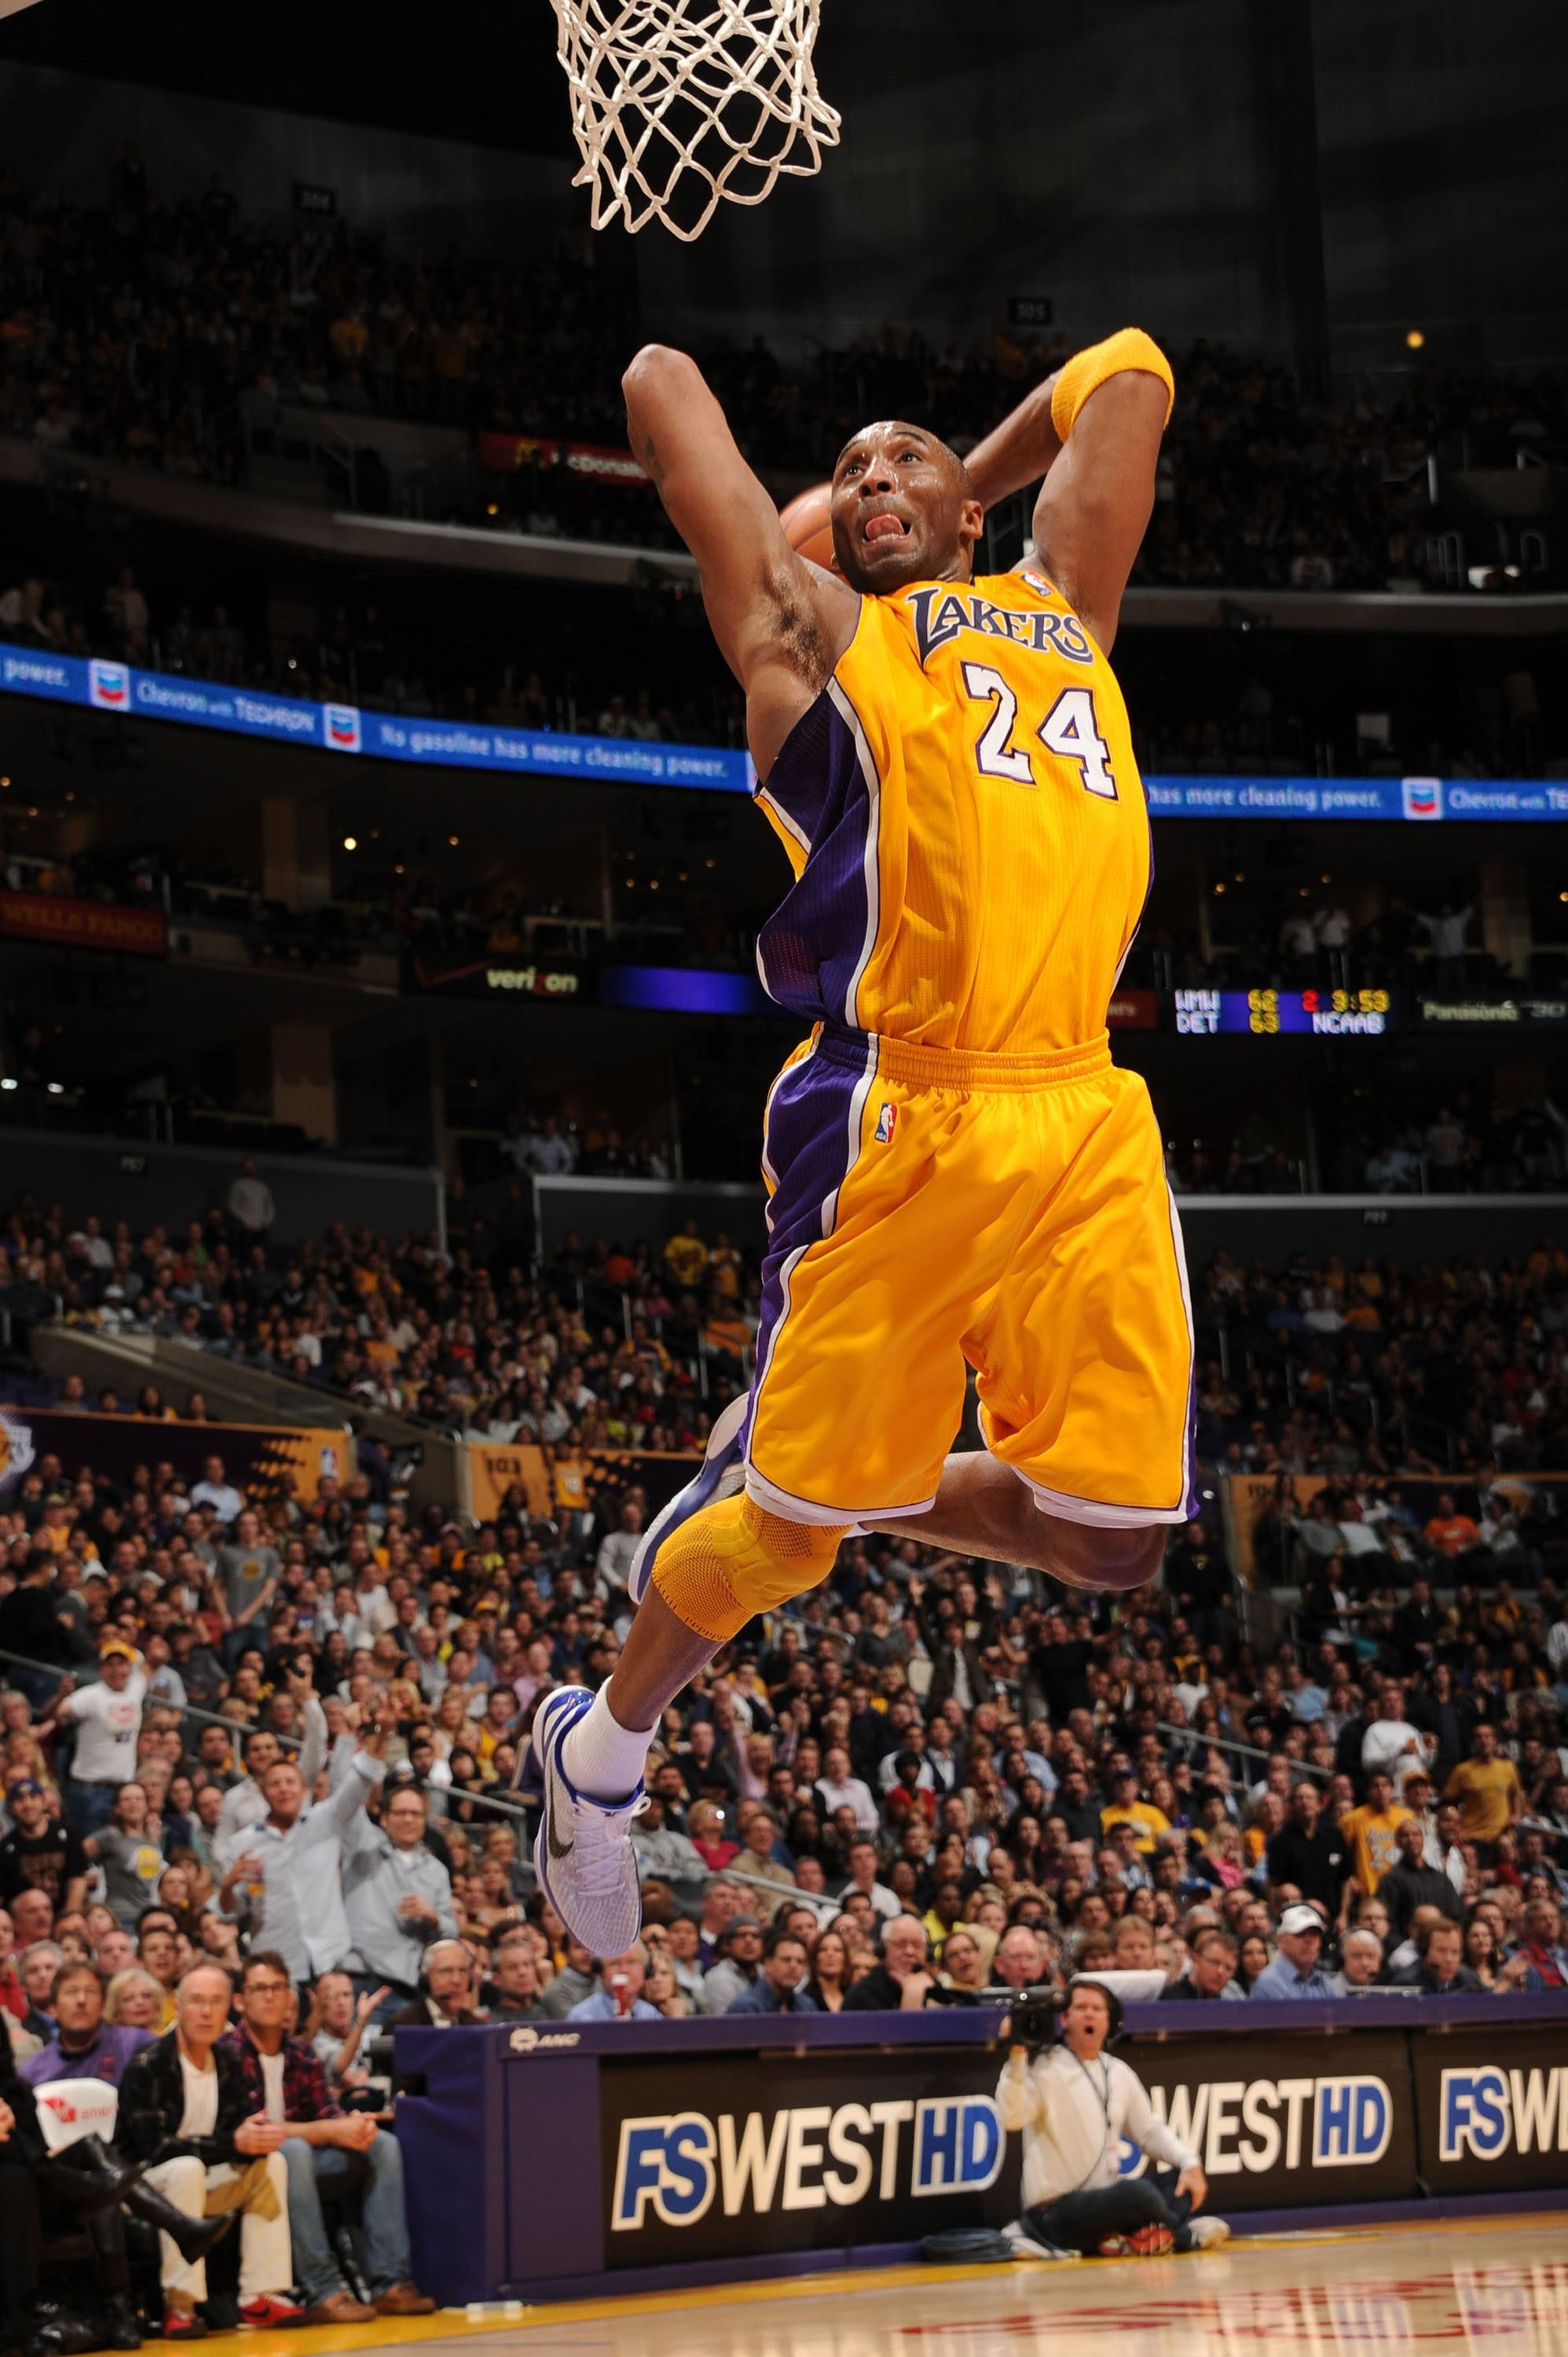 Kobe Bryant #24 of the Los Angeles Lakers goes up for a dunk against the Sacramento Kings at Staples Center. | Source: Getty Images